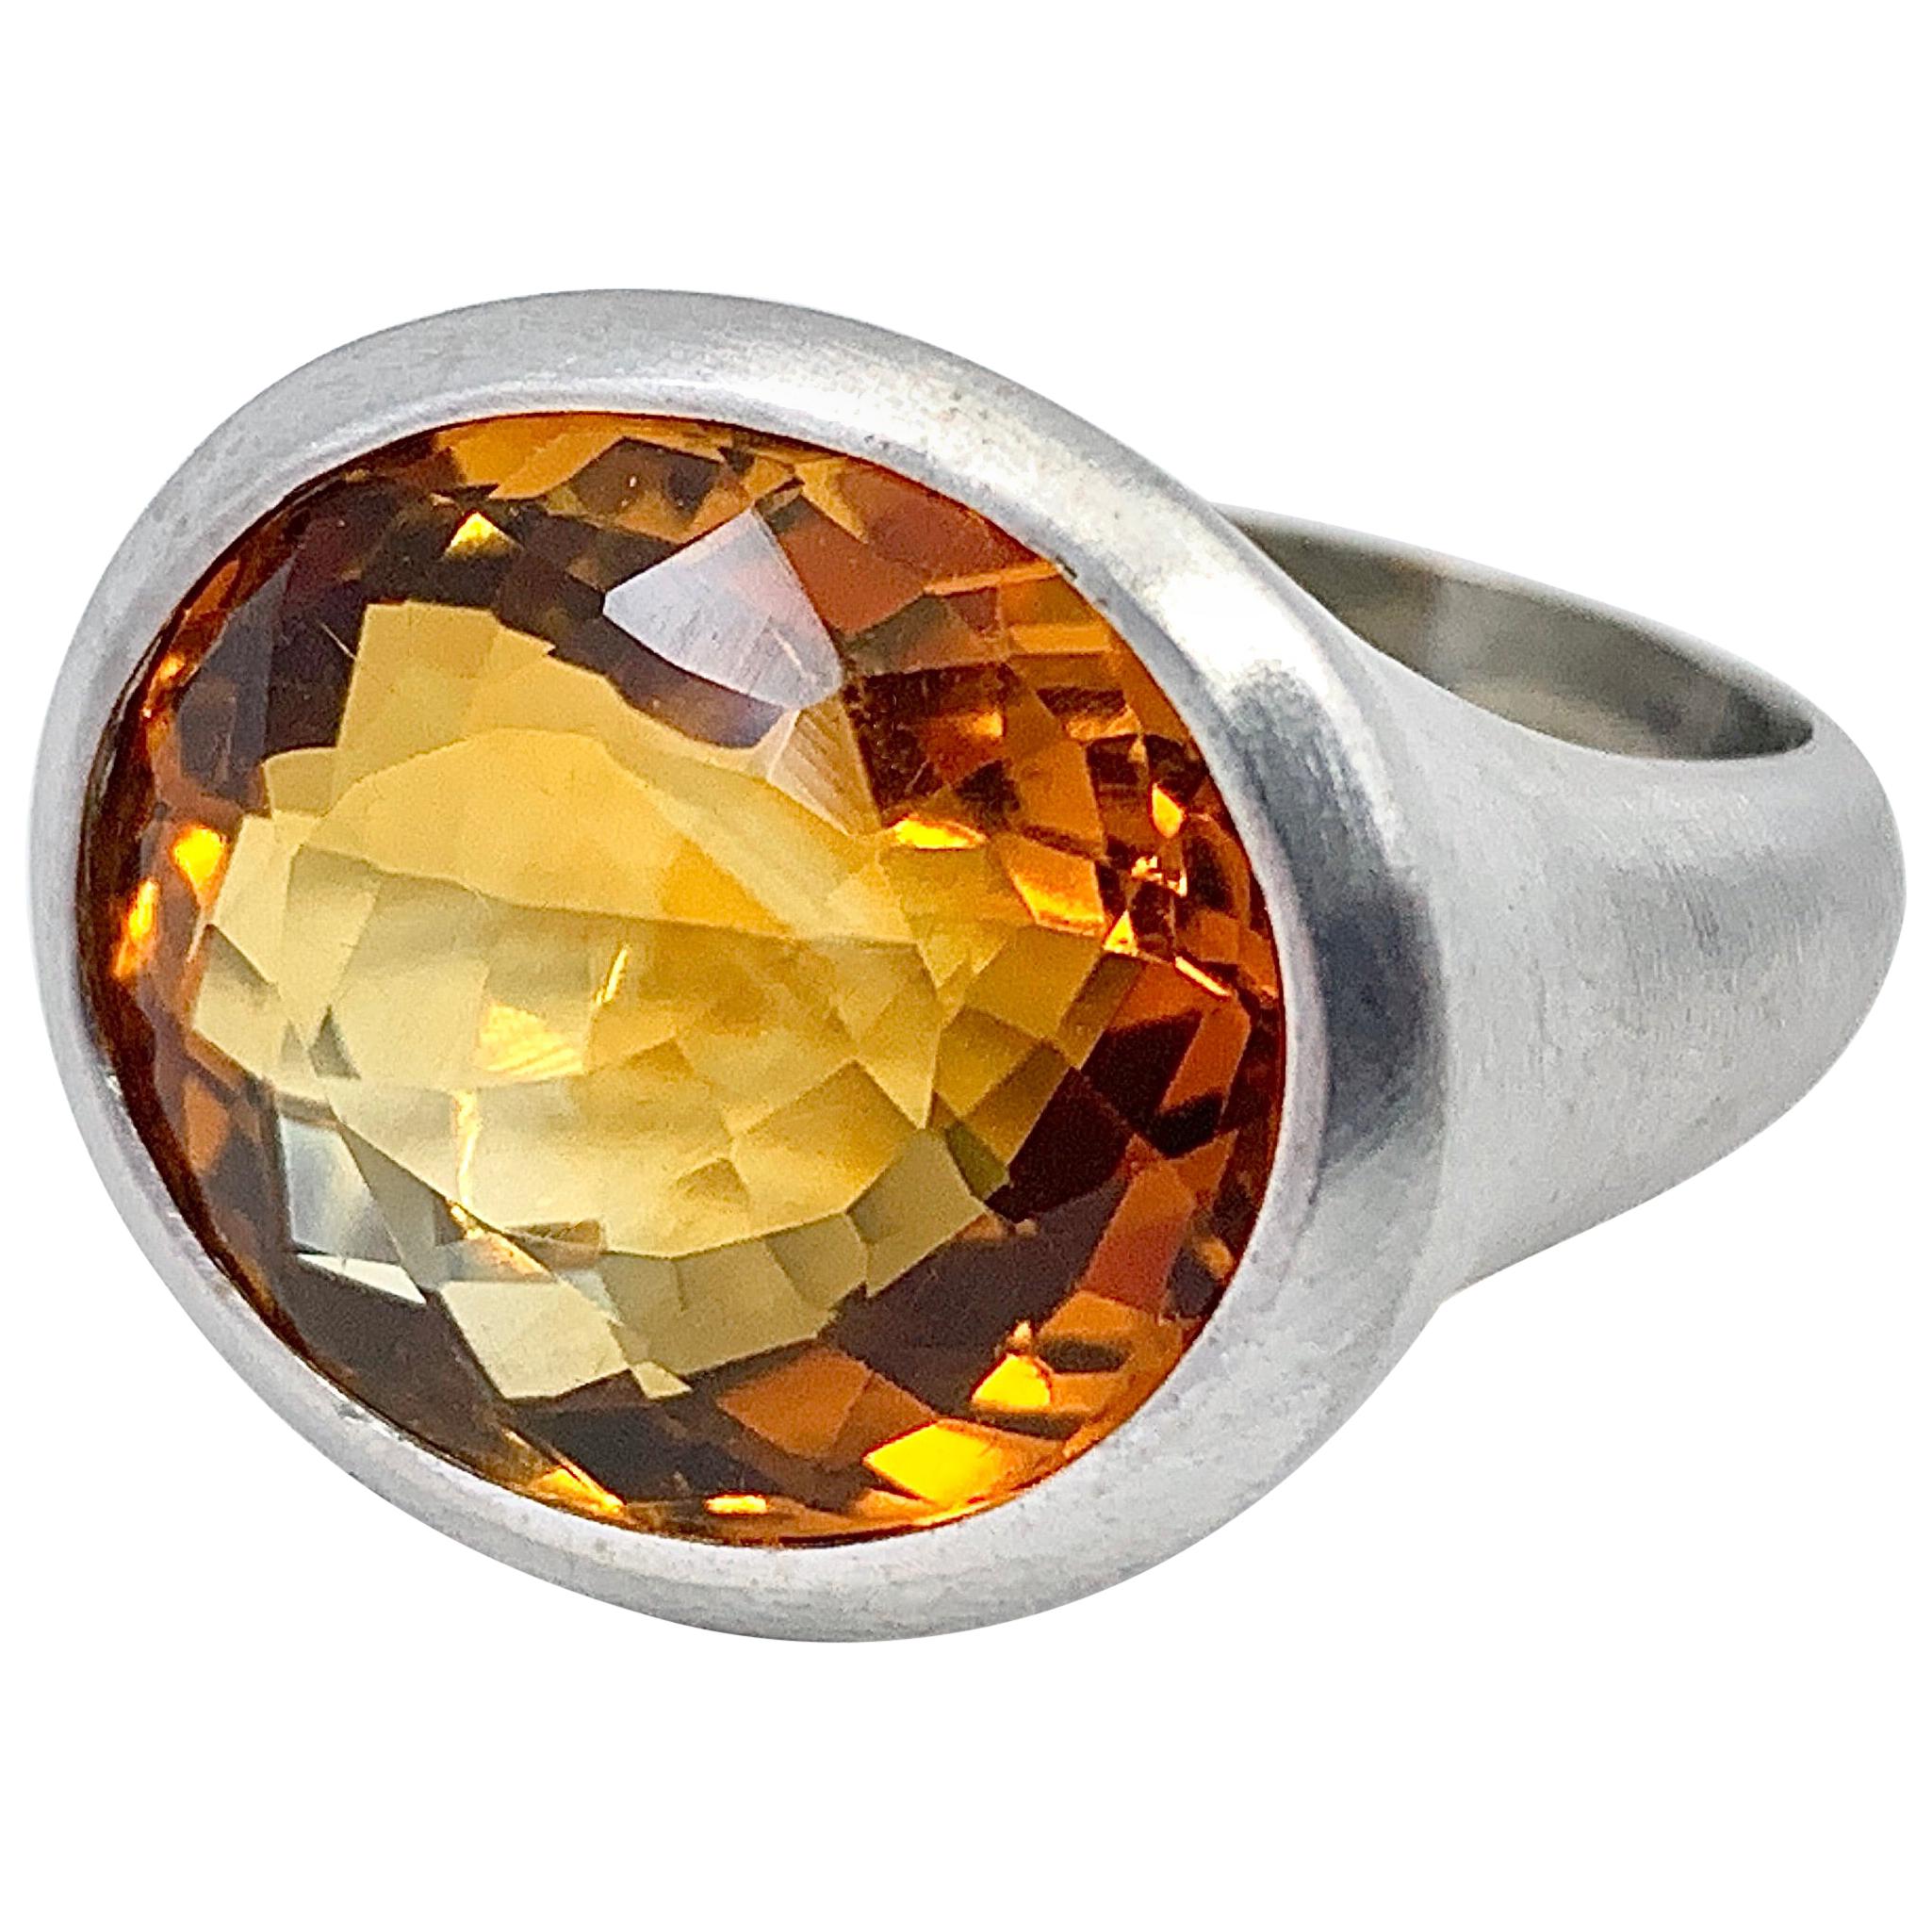 "Flamme et Glace" 16 Carat Oval Citrine in Brushed White Gold Solitaire Setting